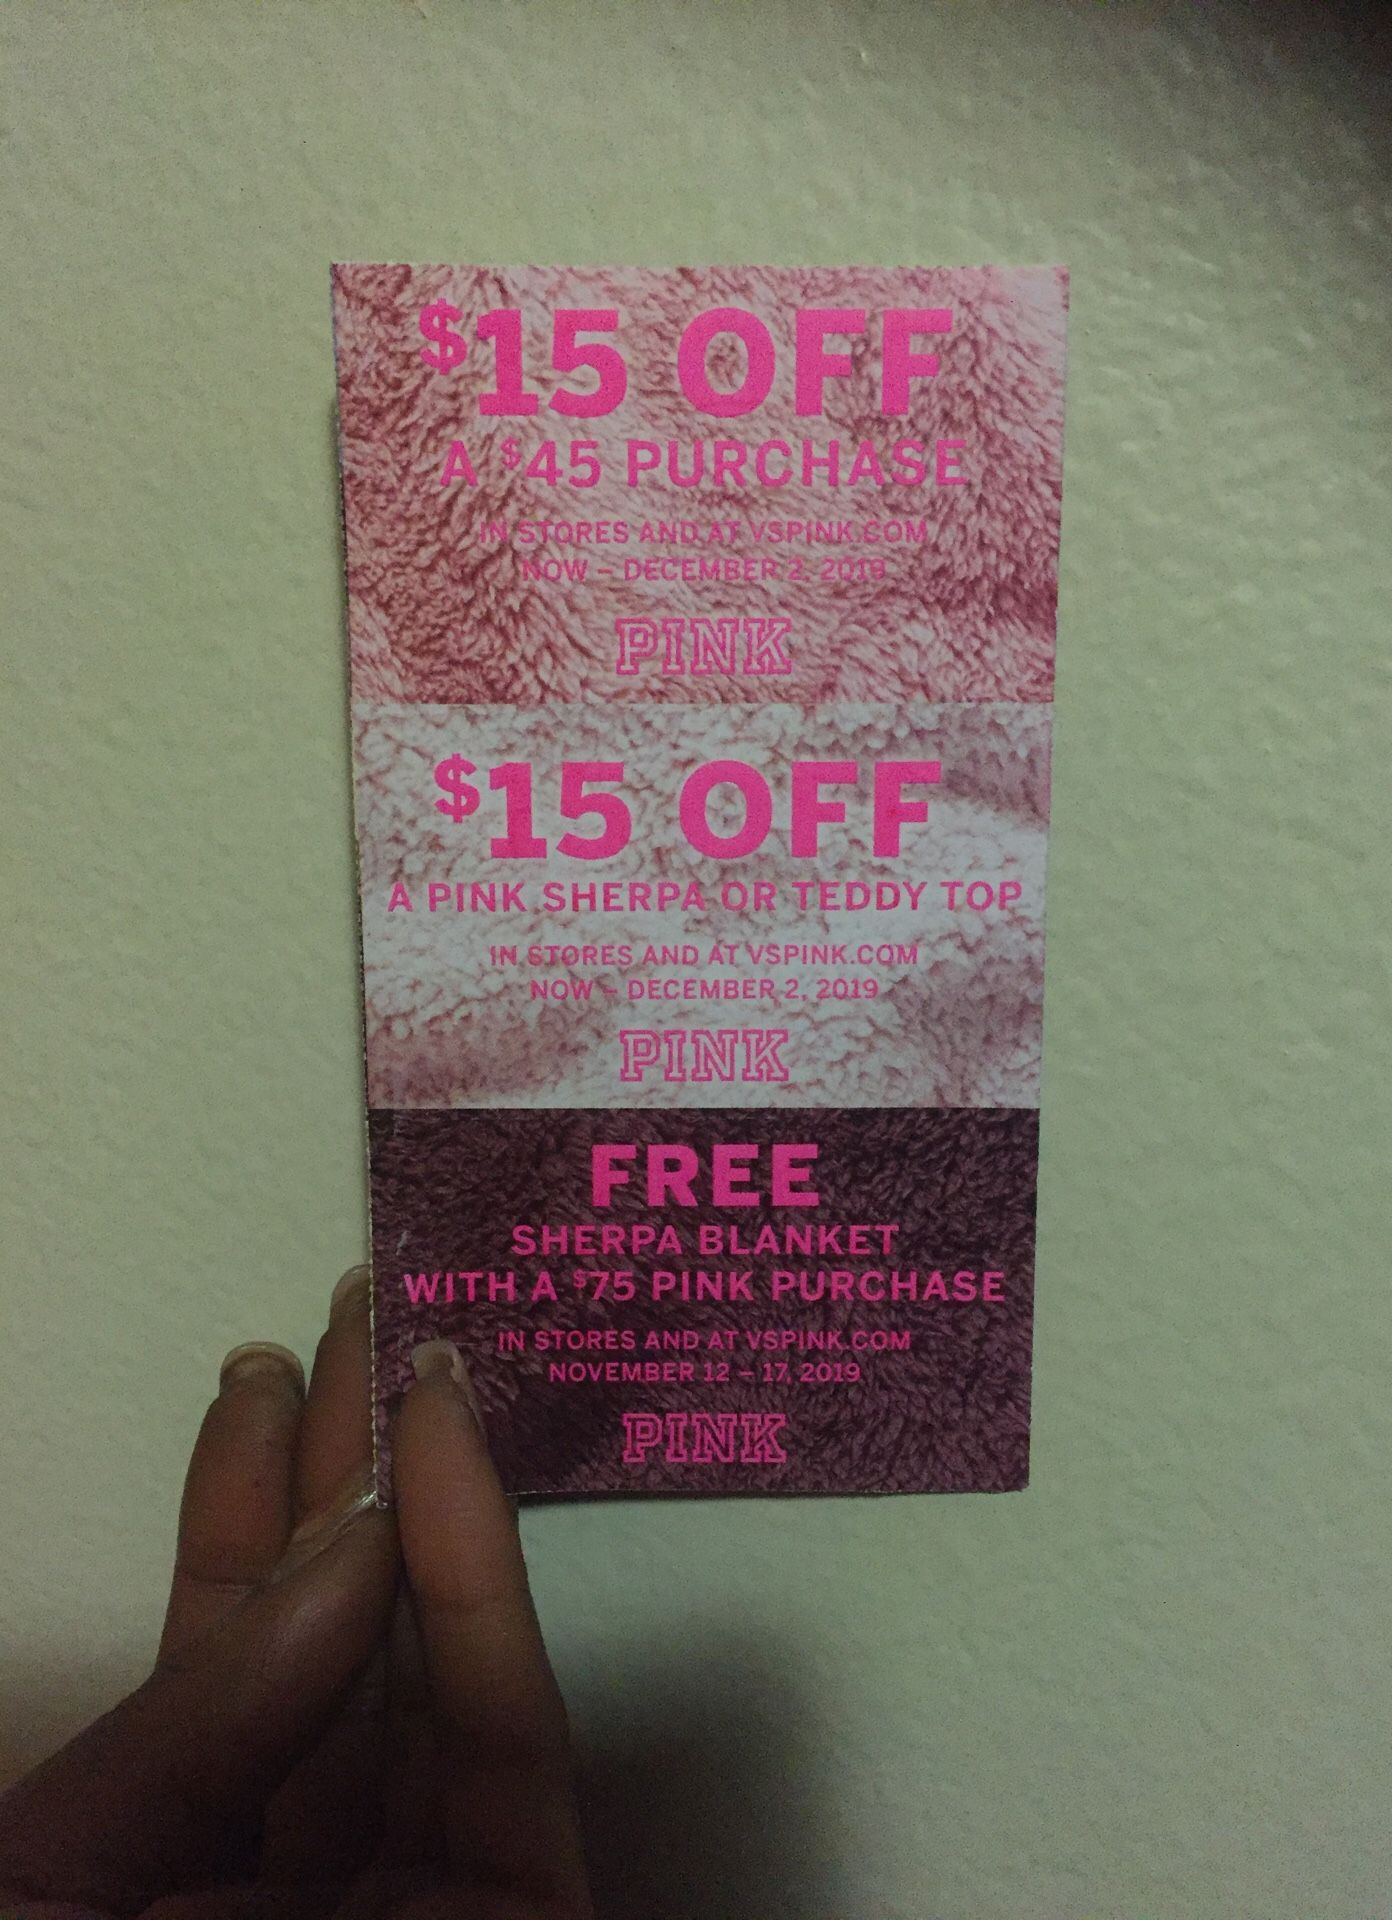 PINK Coupons that expire Dec 2nd. I’m selling all three for $5 (coupon description below)